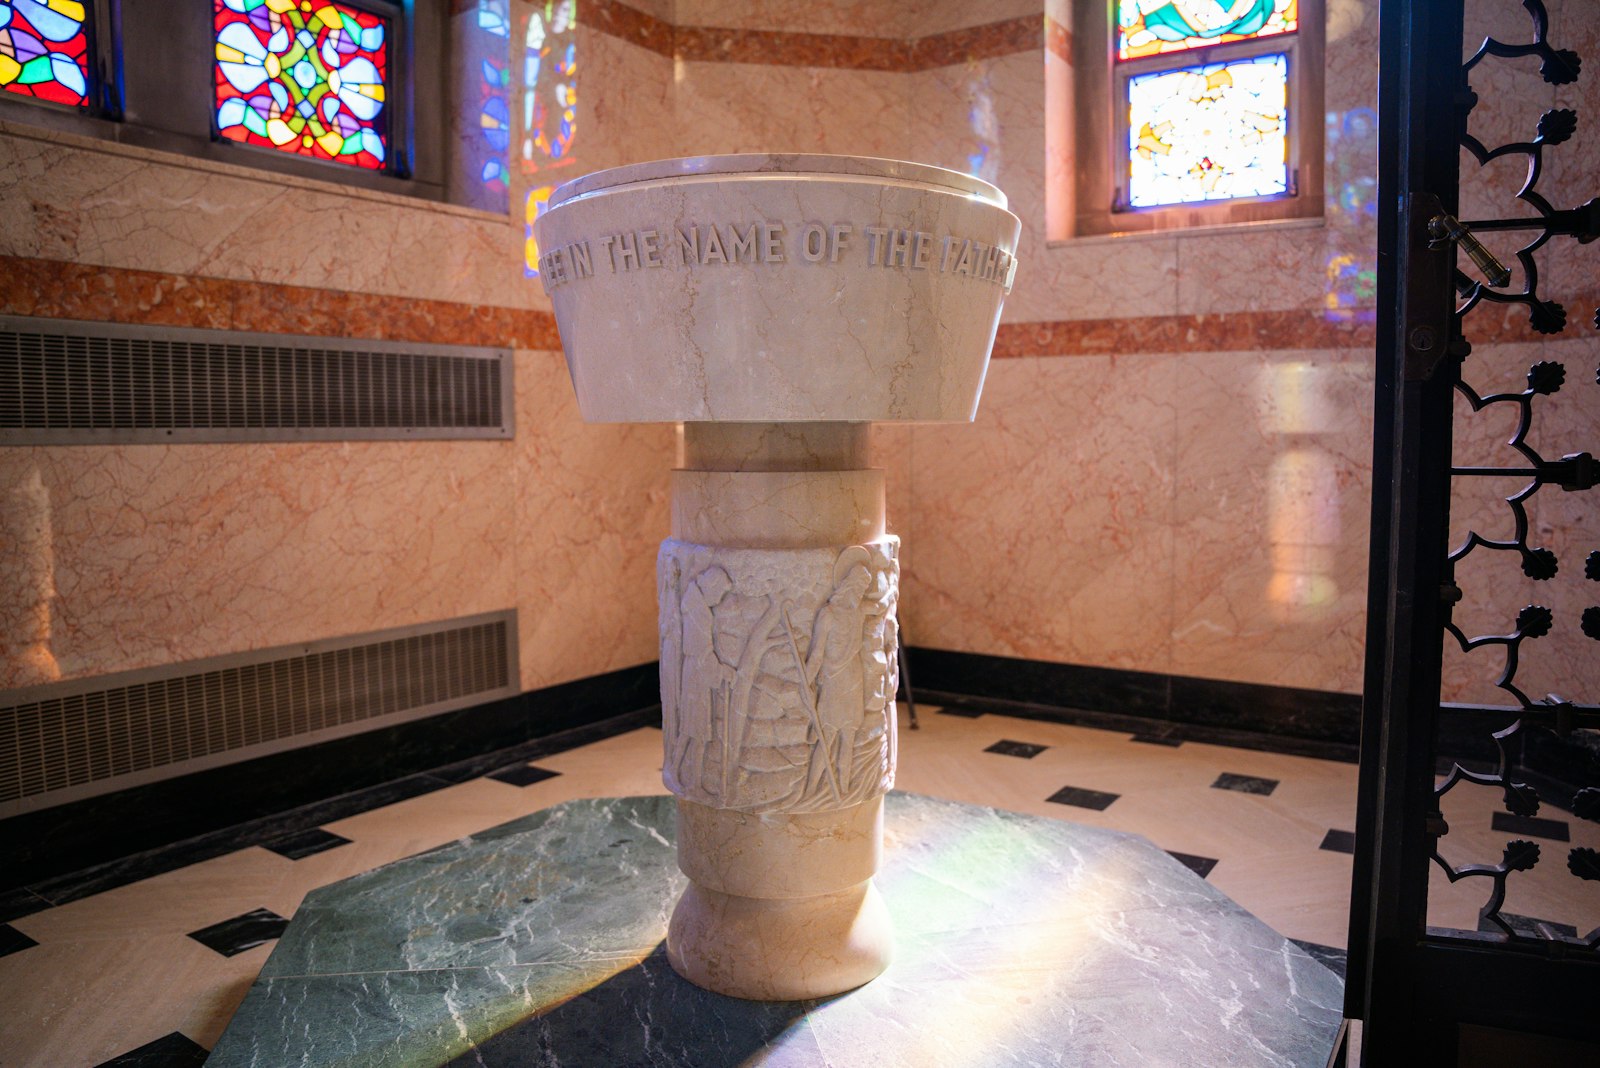 The original baptismal font at St. Matthew Church is set apart from the rest of the church, a callback to earlier theological lessons in church architecture. Fr. Novelly now baptizes people in the church, but usually vests for Mass in the original baptistry.